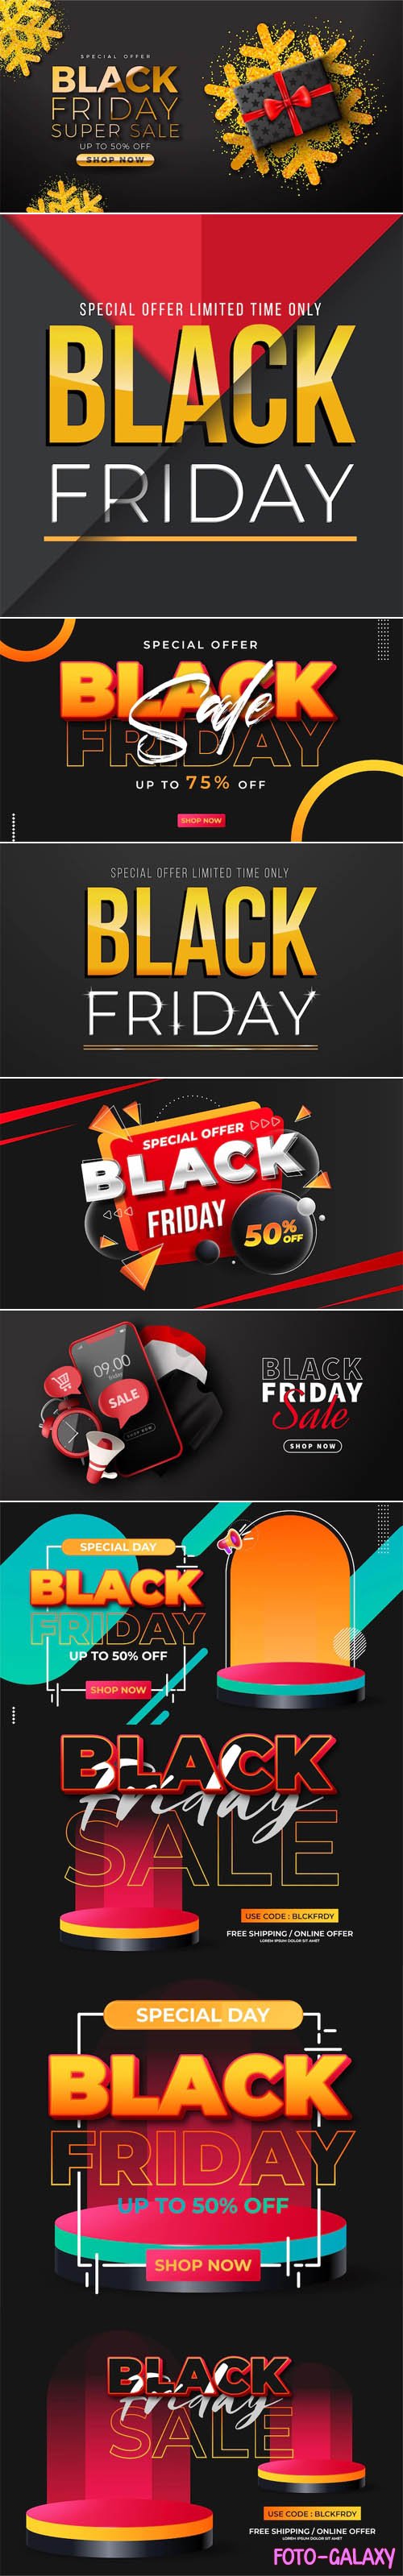 Black Friday - 10 Banners & Backgrounds Vector Templates